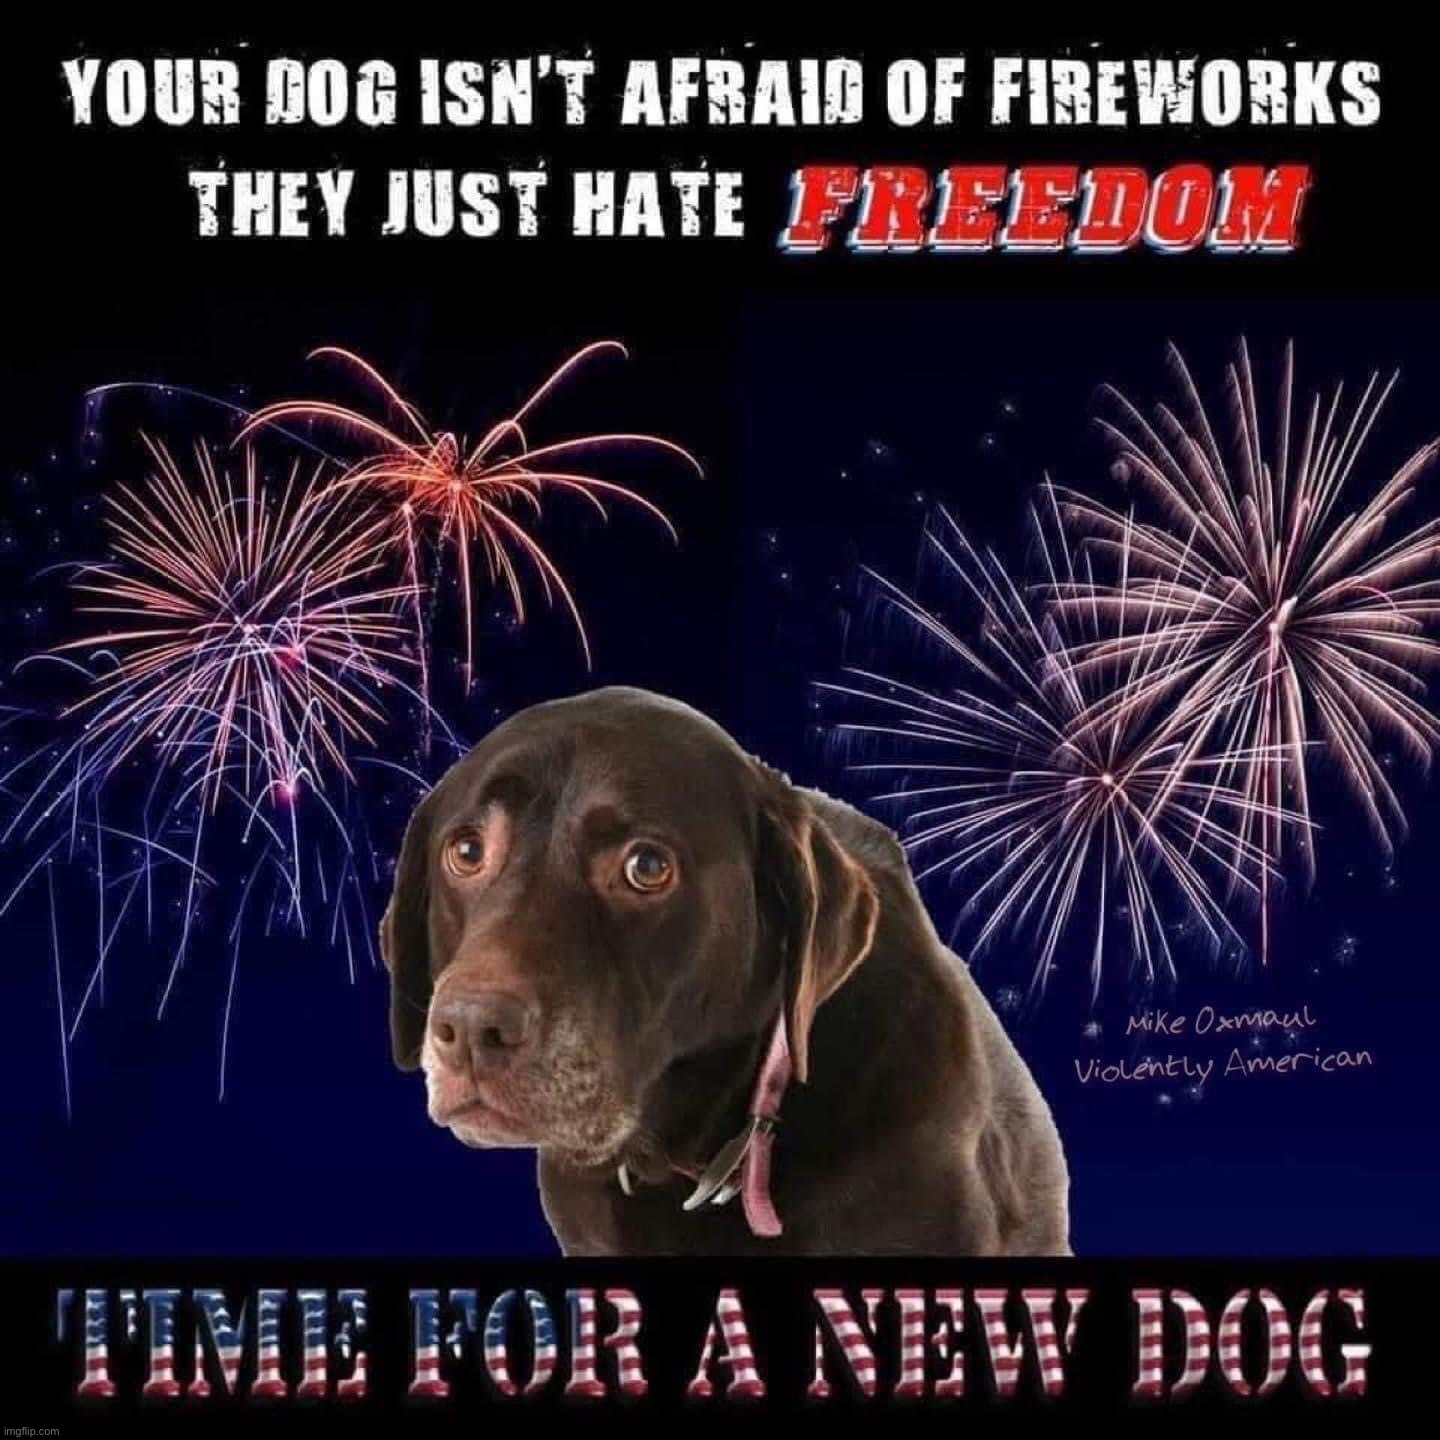 He wants to go back to the pound. Unbased, maga | image tagged in your dog hates freedom time for a new dog,maga,magaa,magaaa,magaaaa,magaaaaa | made w/ Imgflip meme maker